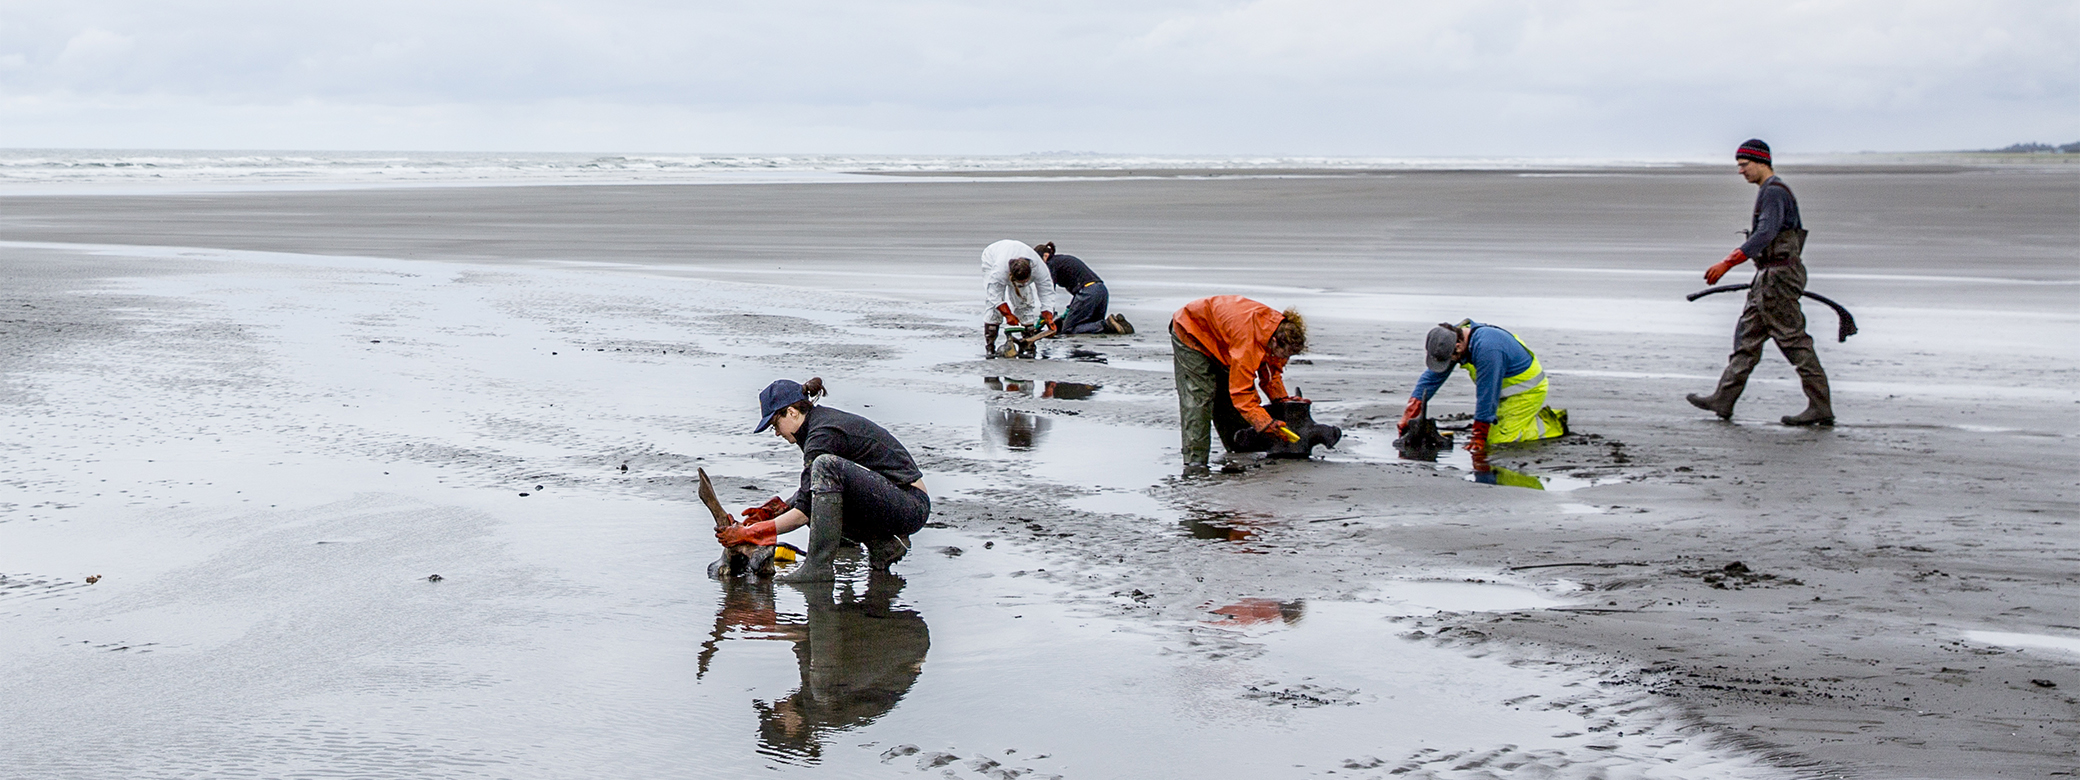 UW students doing research and digging in the sand on a beach along the Salish Sea.